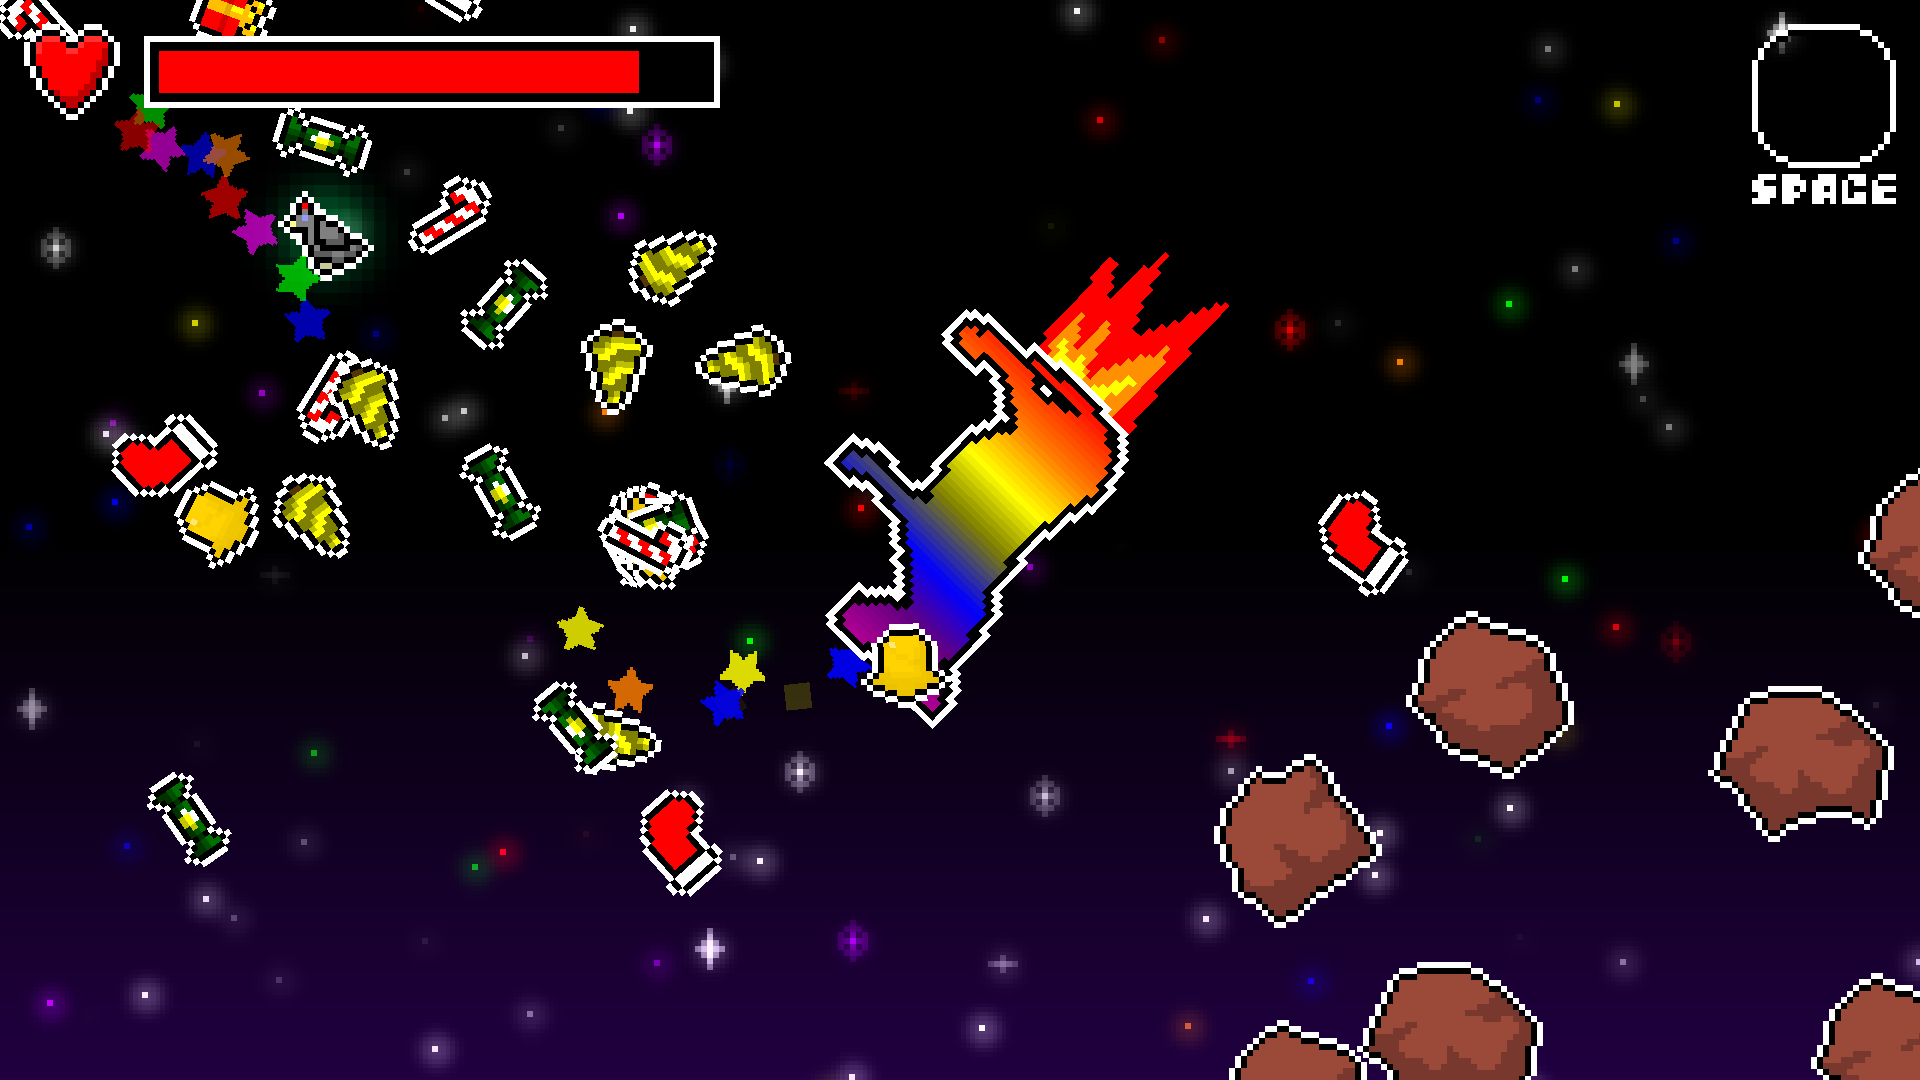 Screenshot of the game. A pixelated rainbow-coloured donkey in the centre of the screen with flames coming from its butt, surrounded by various presents, Christmas decorations and asteroids.